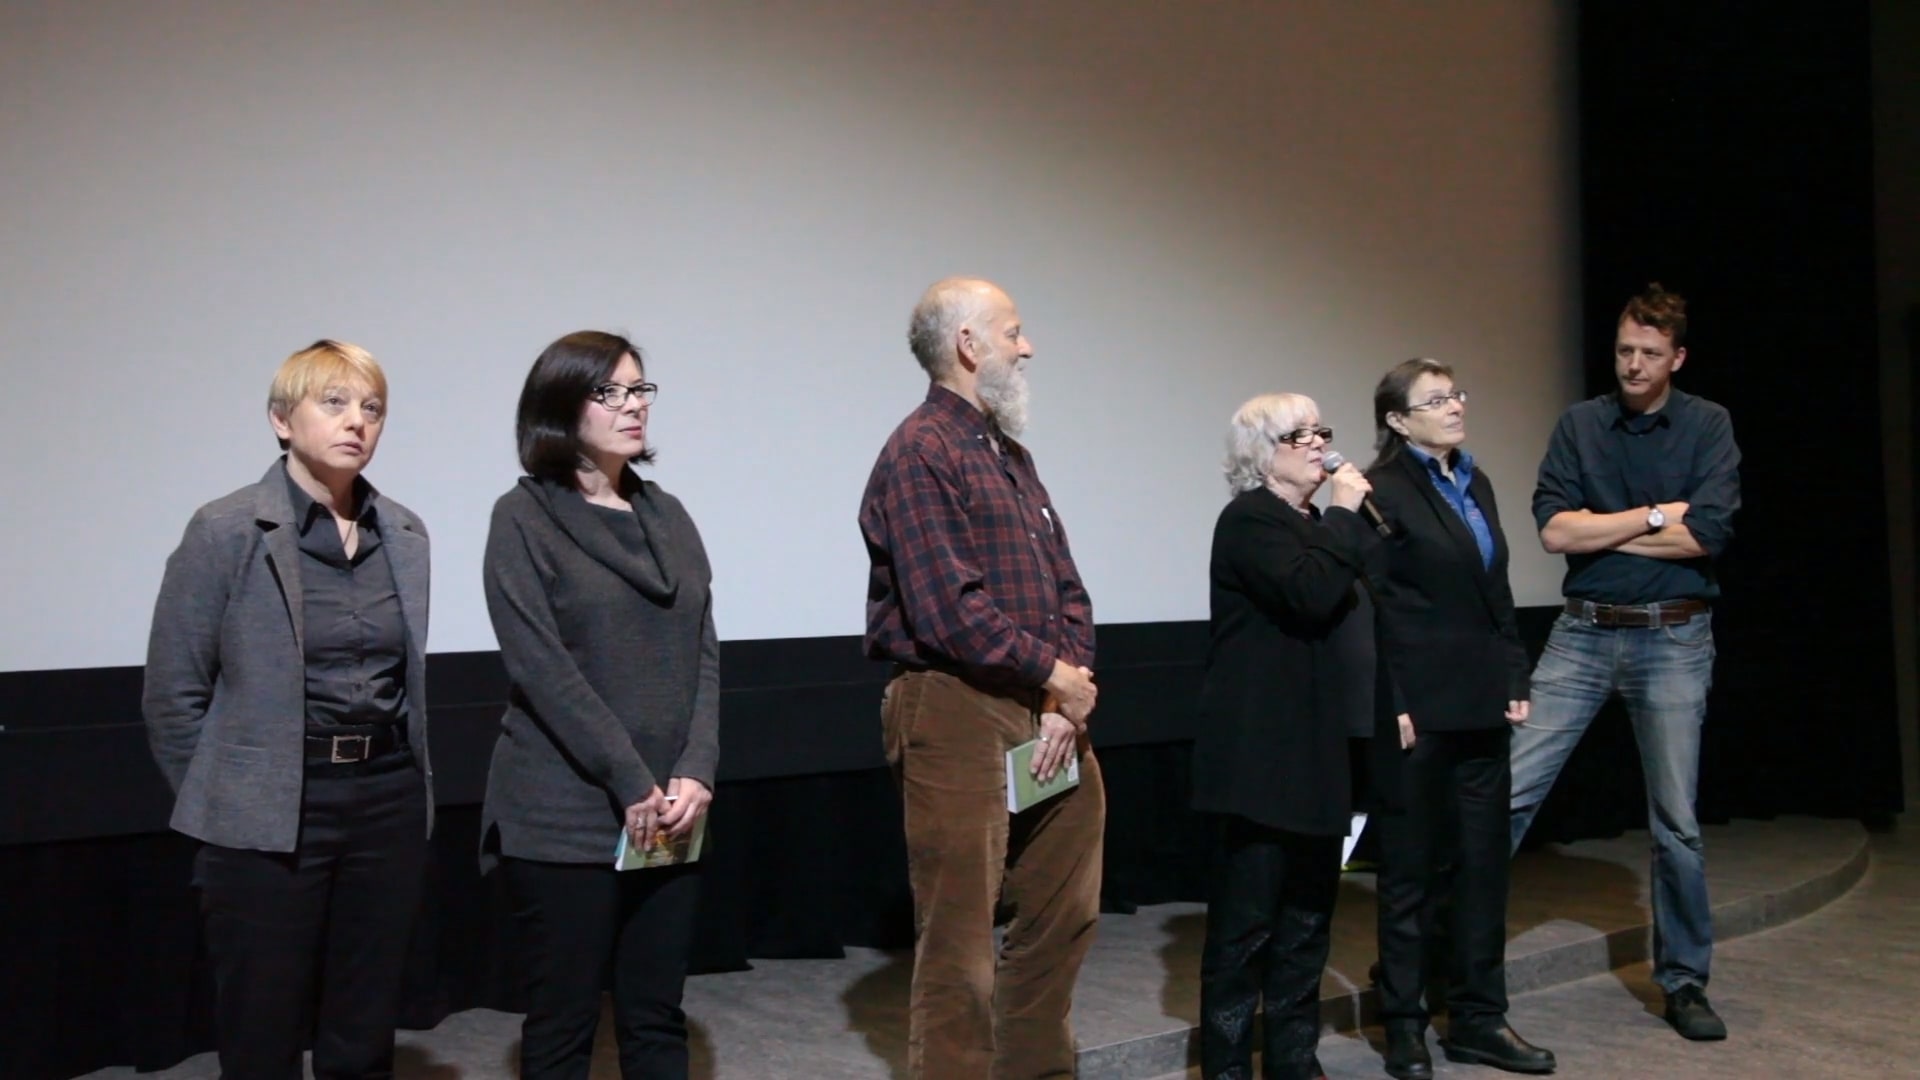 Still from Q&A with directors and book authors - FORBIDDEN LOVE